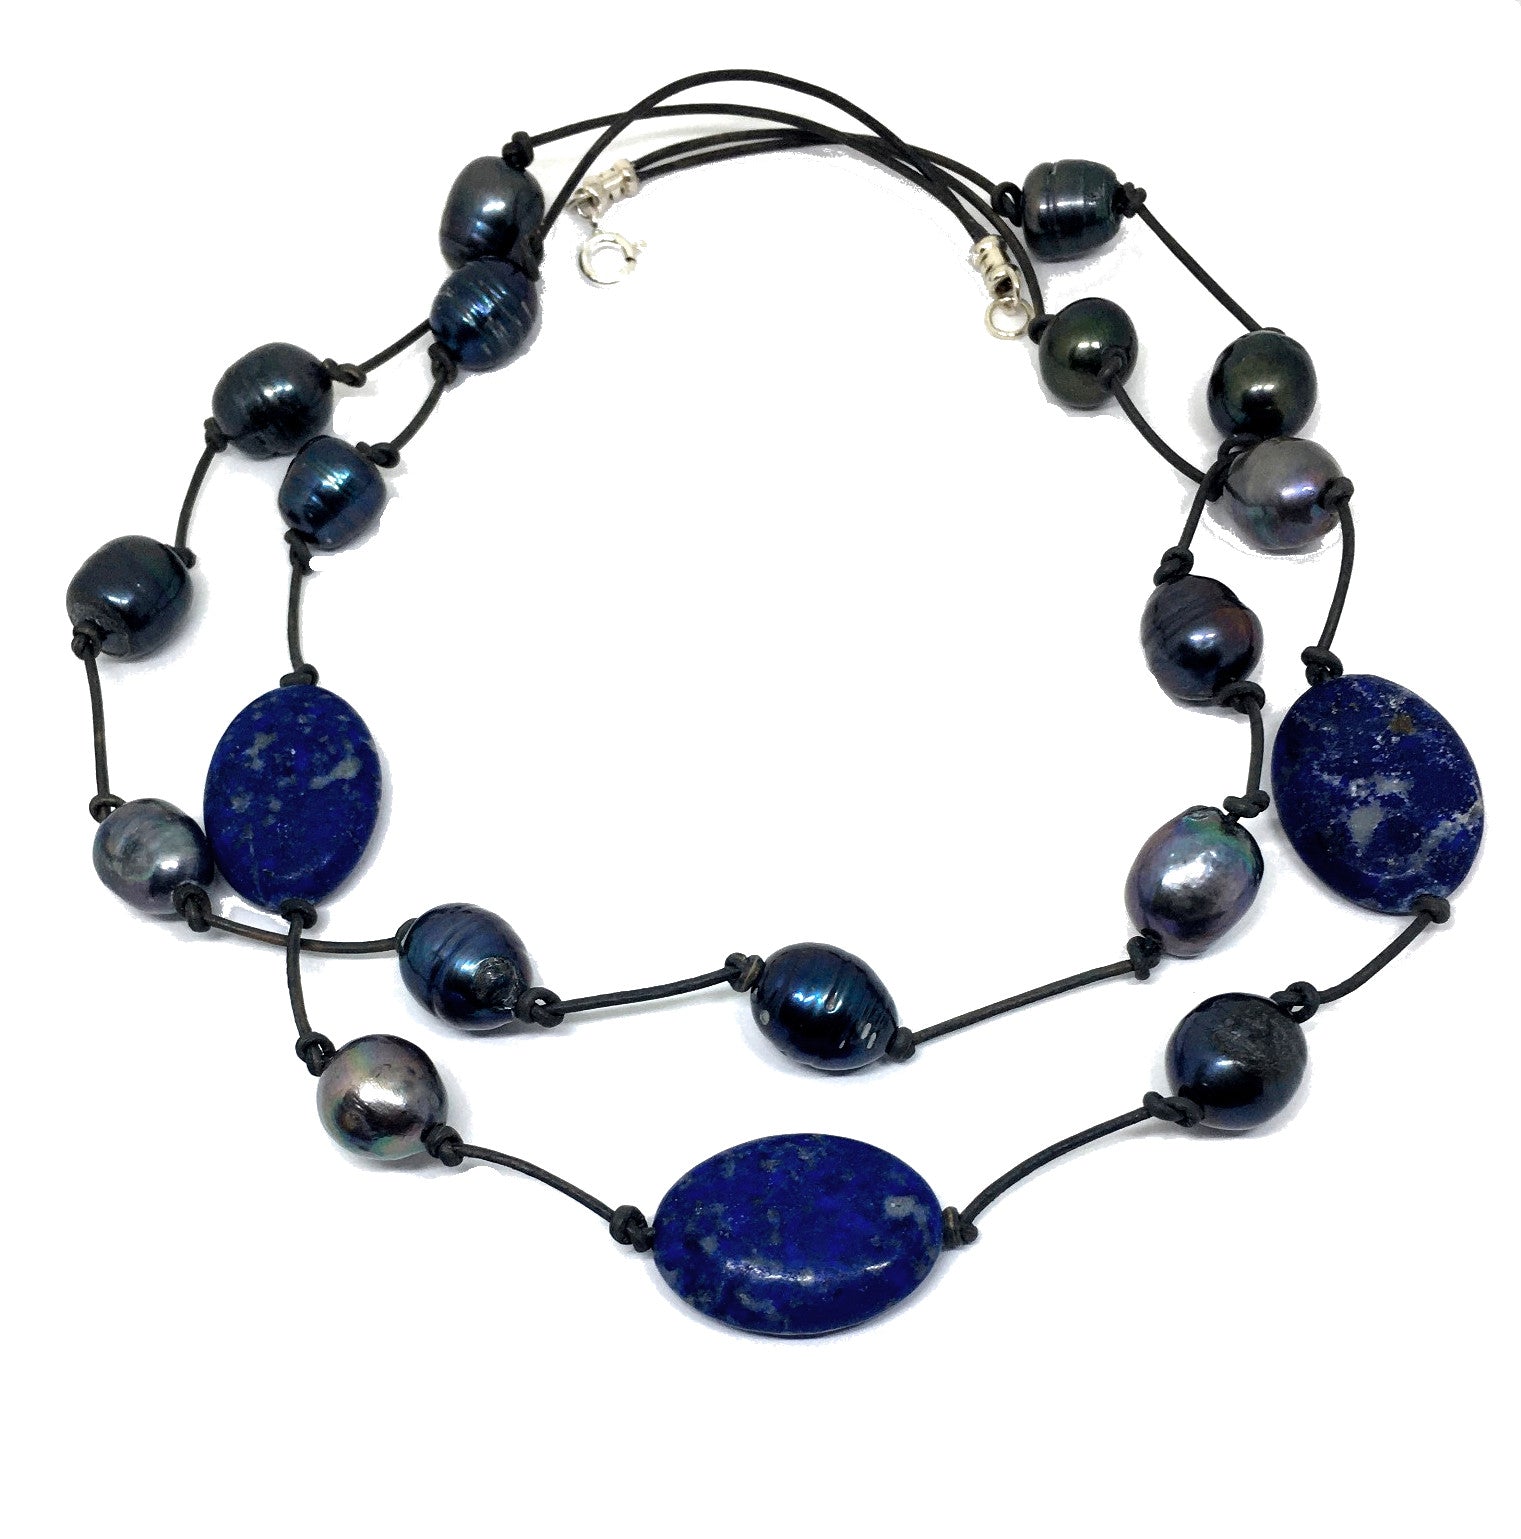 Lapis Lazuli and Baroque Peacock Pearl Knotted Leather Double Strand Necklace